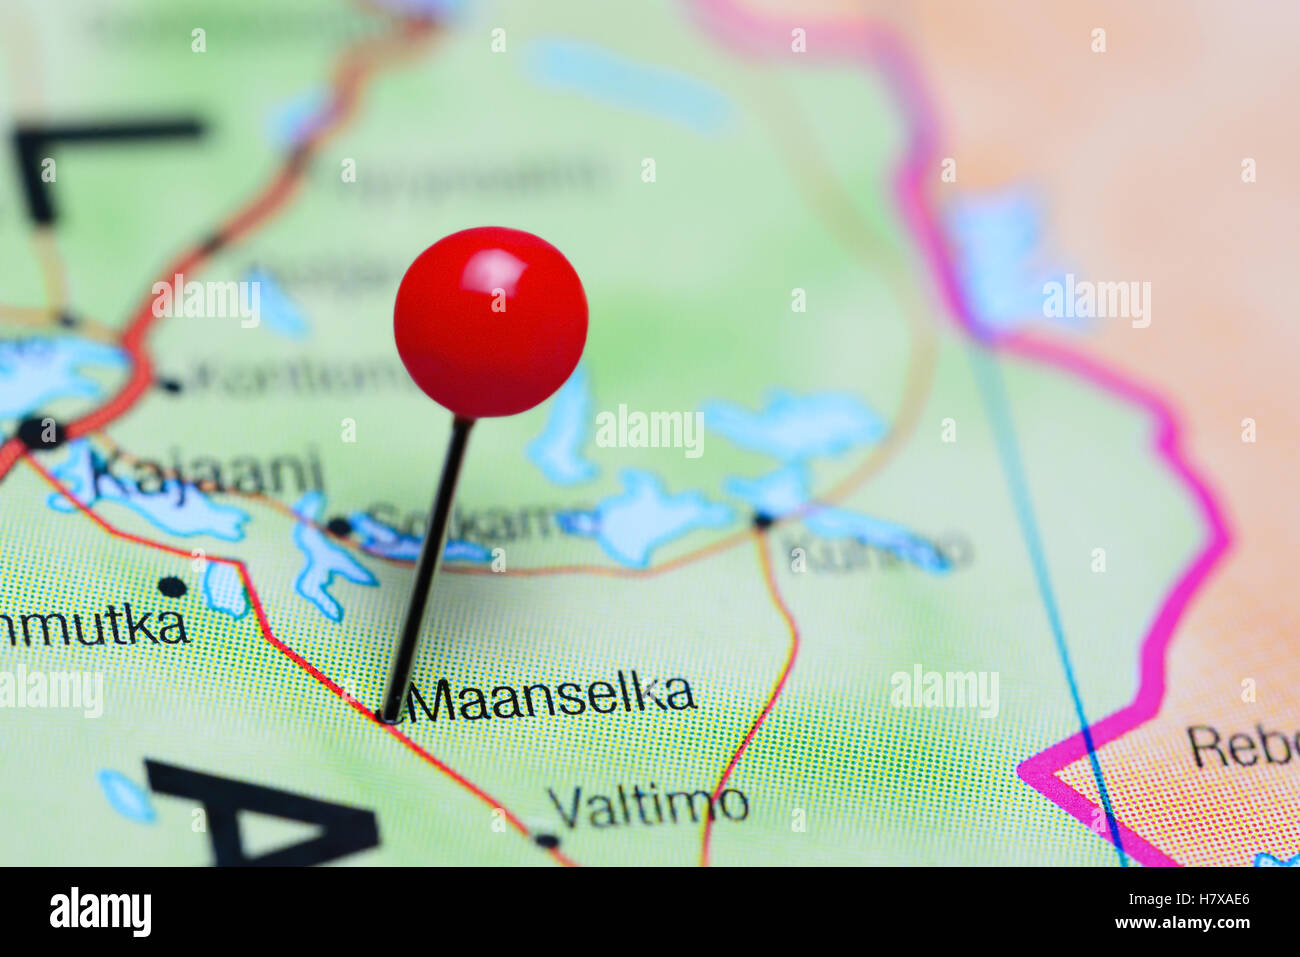 Maanselka pinned on a map of Finland Stock Photo